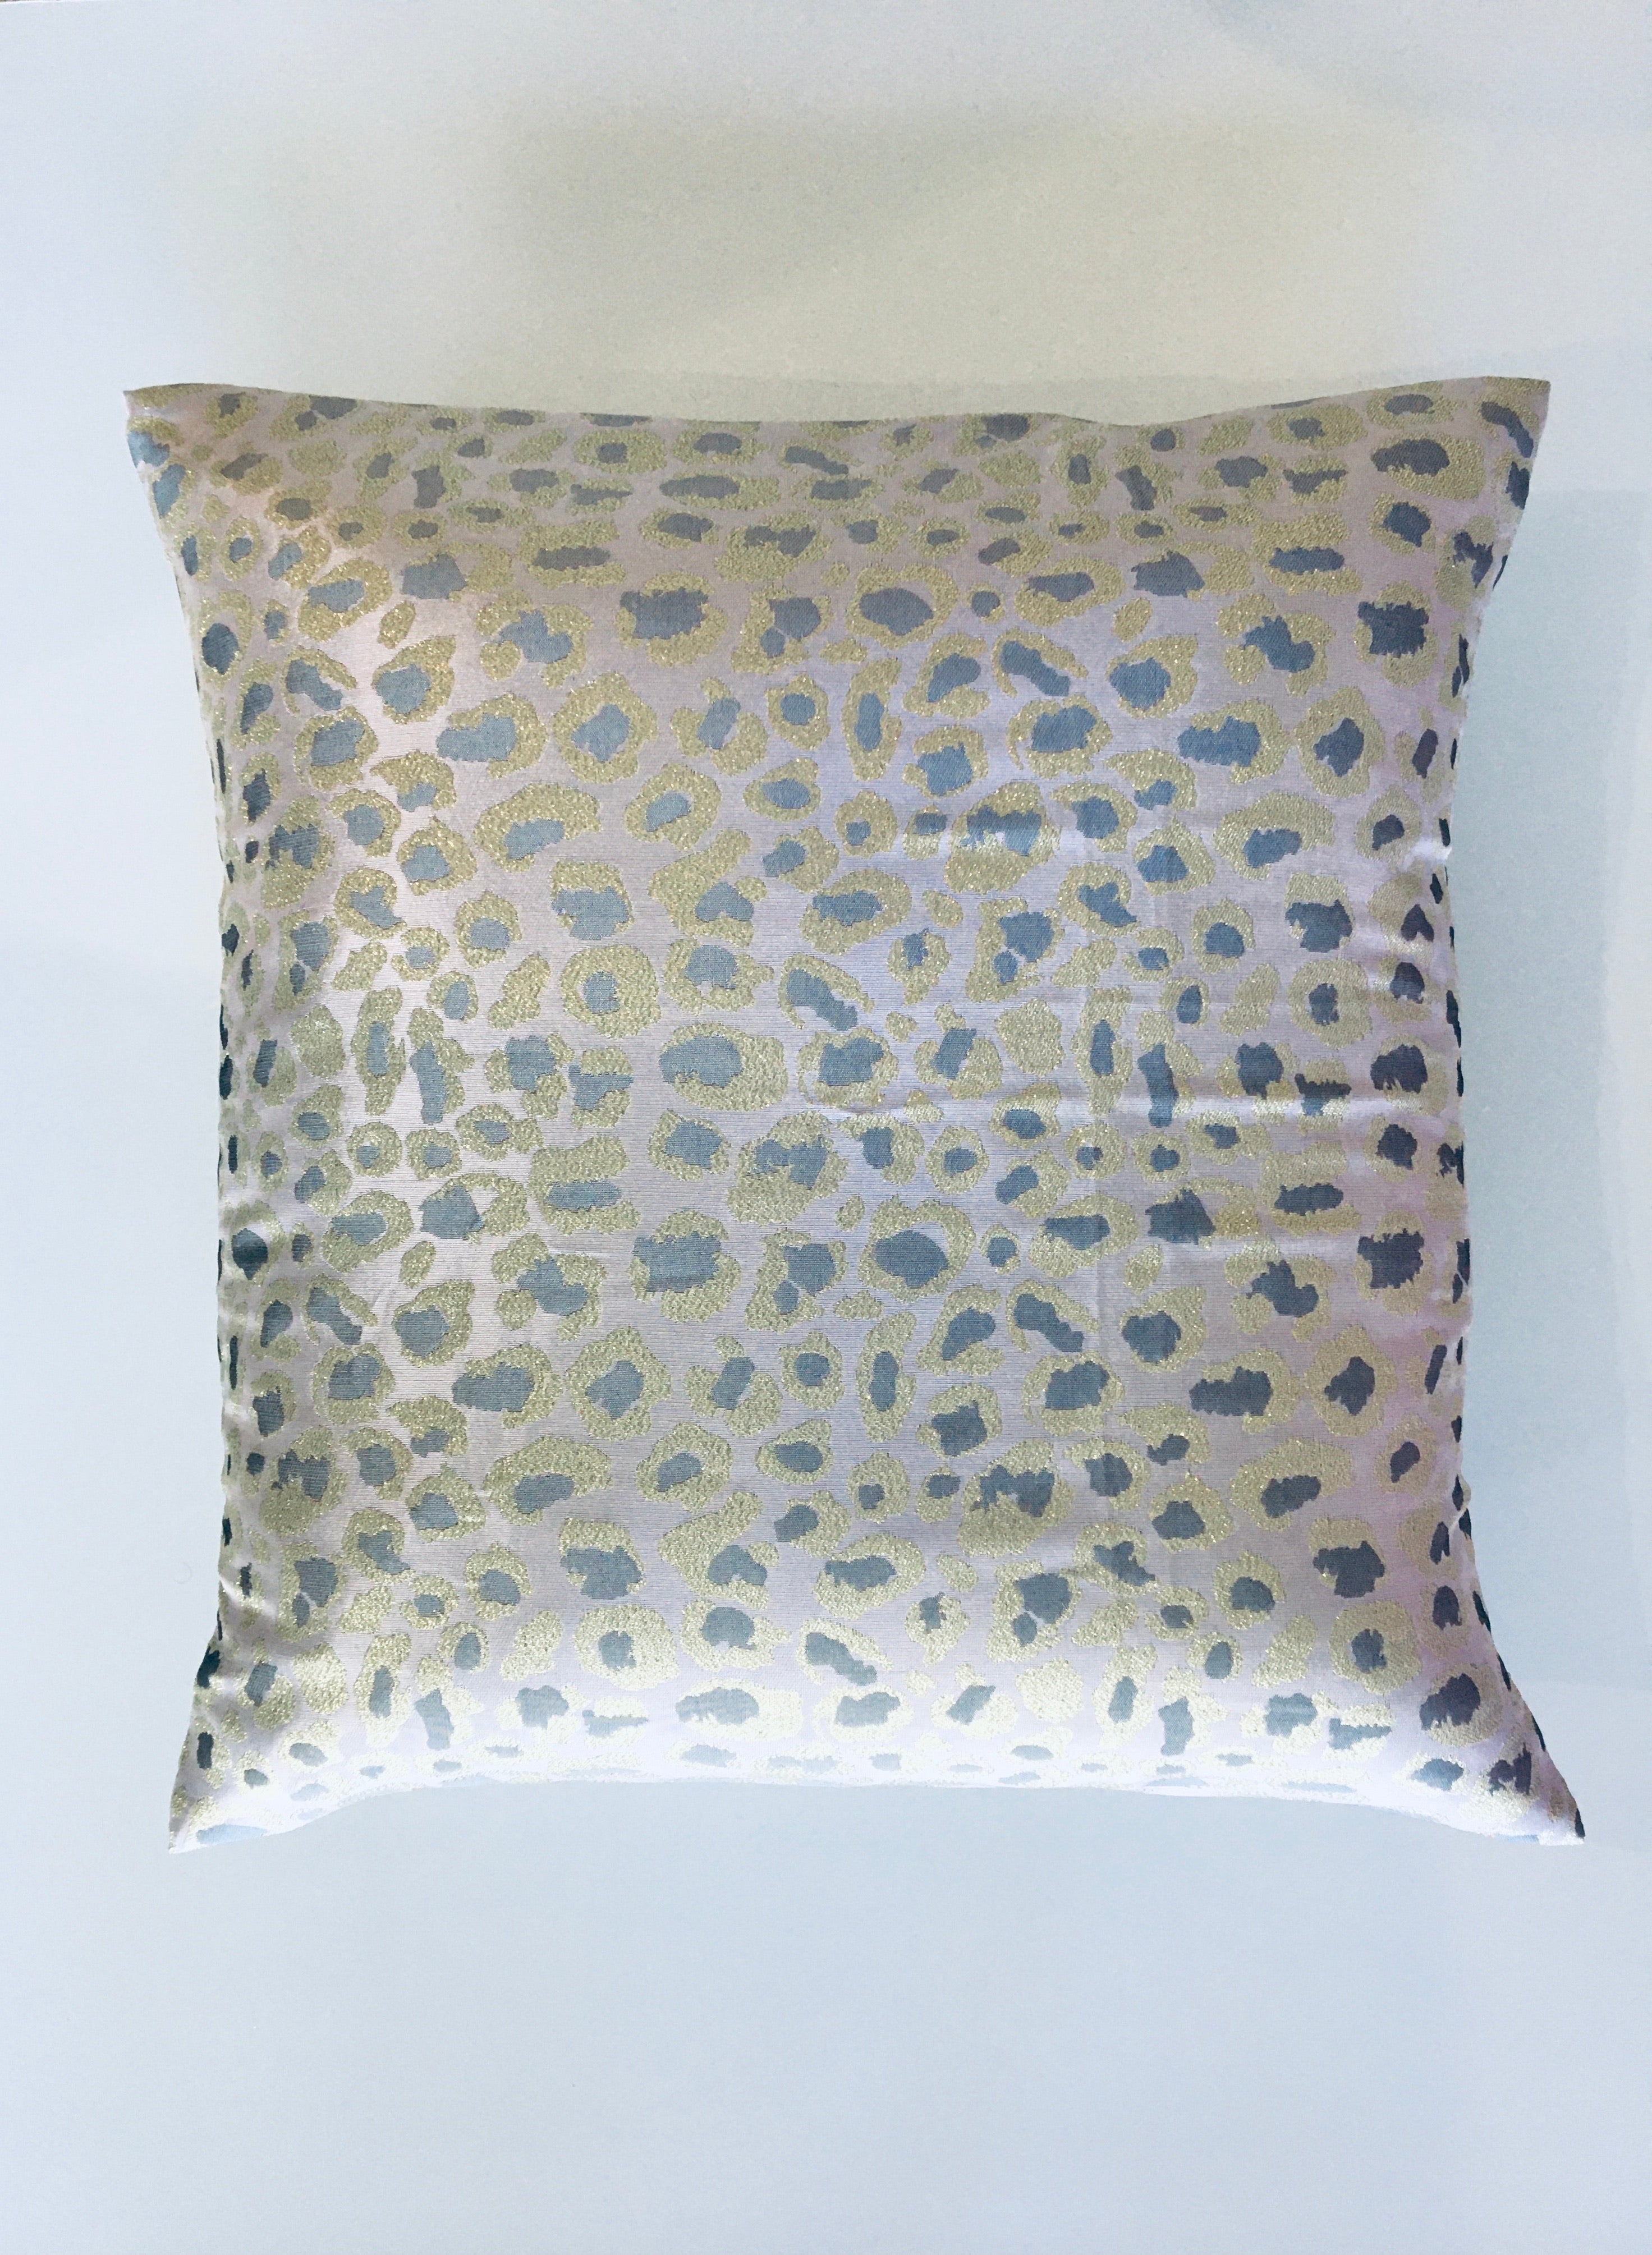 Deluxe Cushion Cover - Pink Leopard In The Moonlight